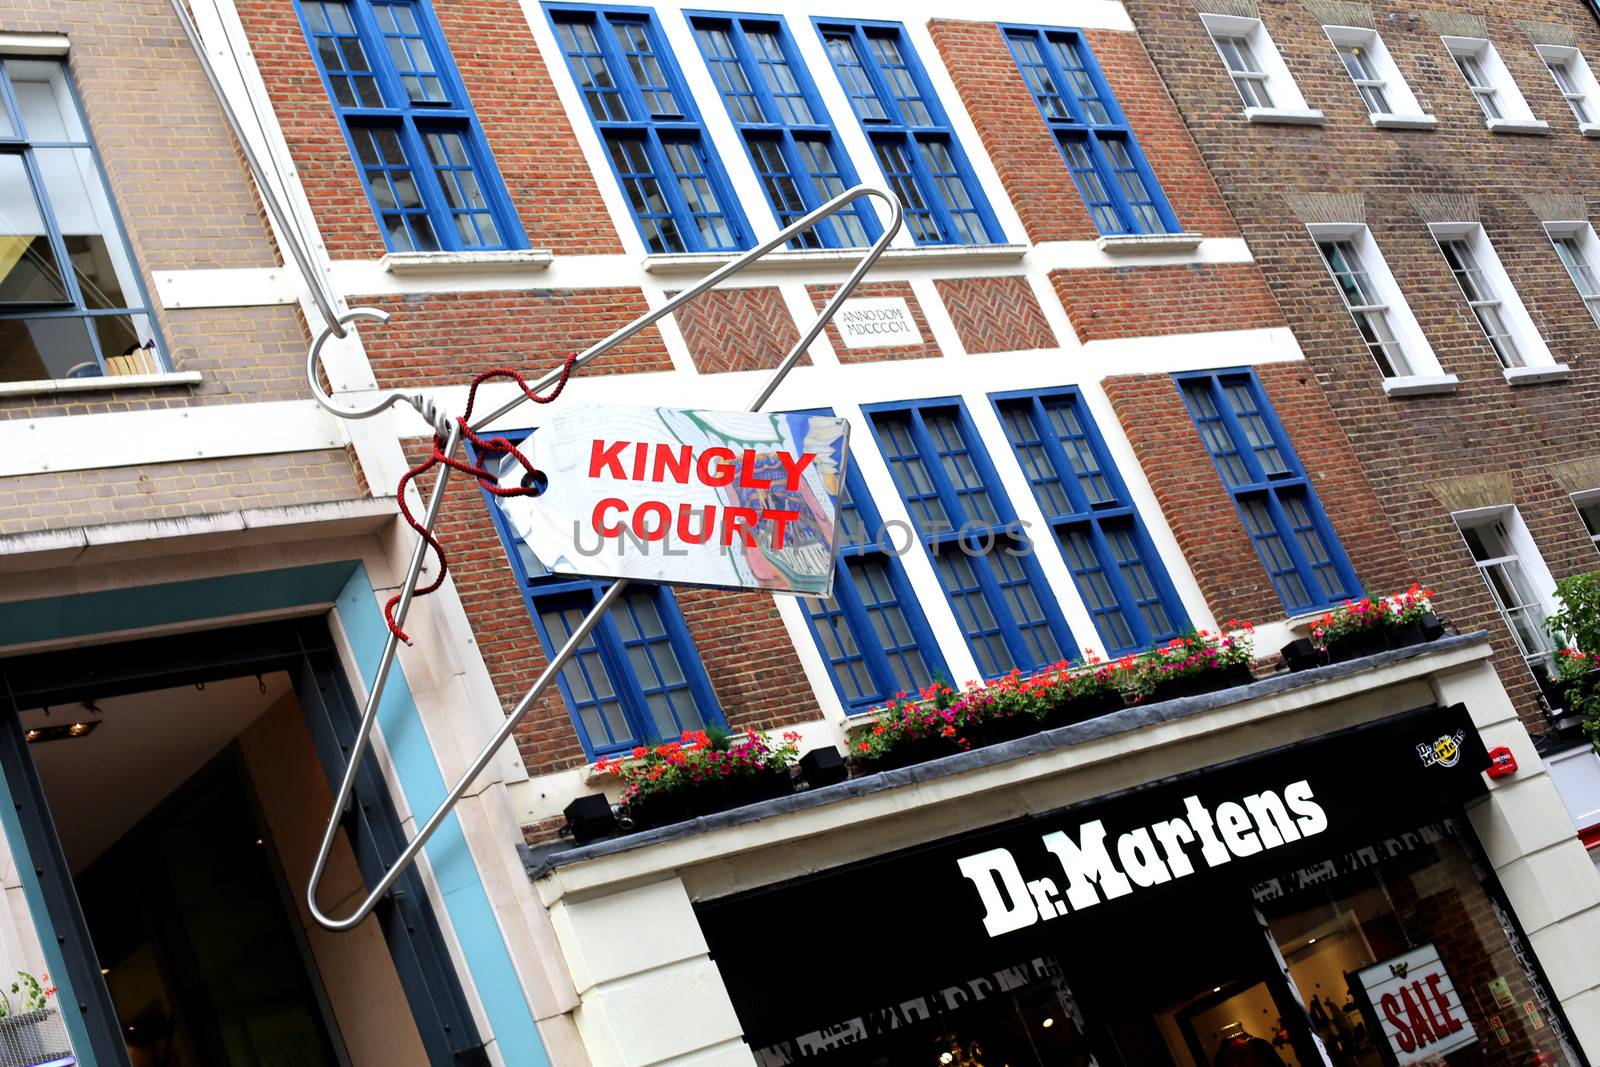 Dr Martens Shop Carnaby Street London by Whiteboxmedia